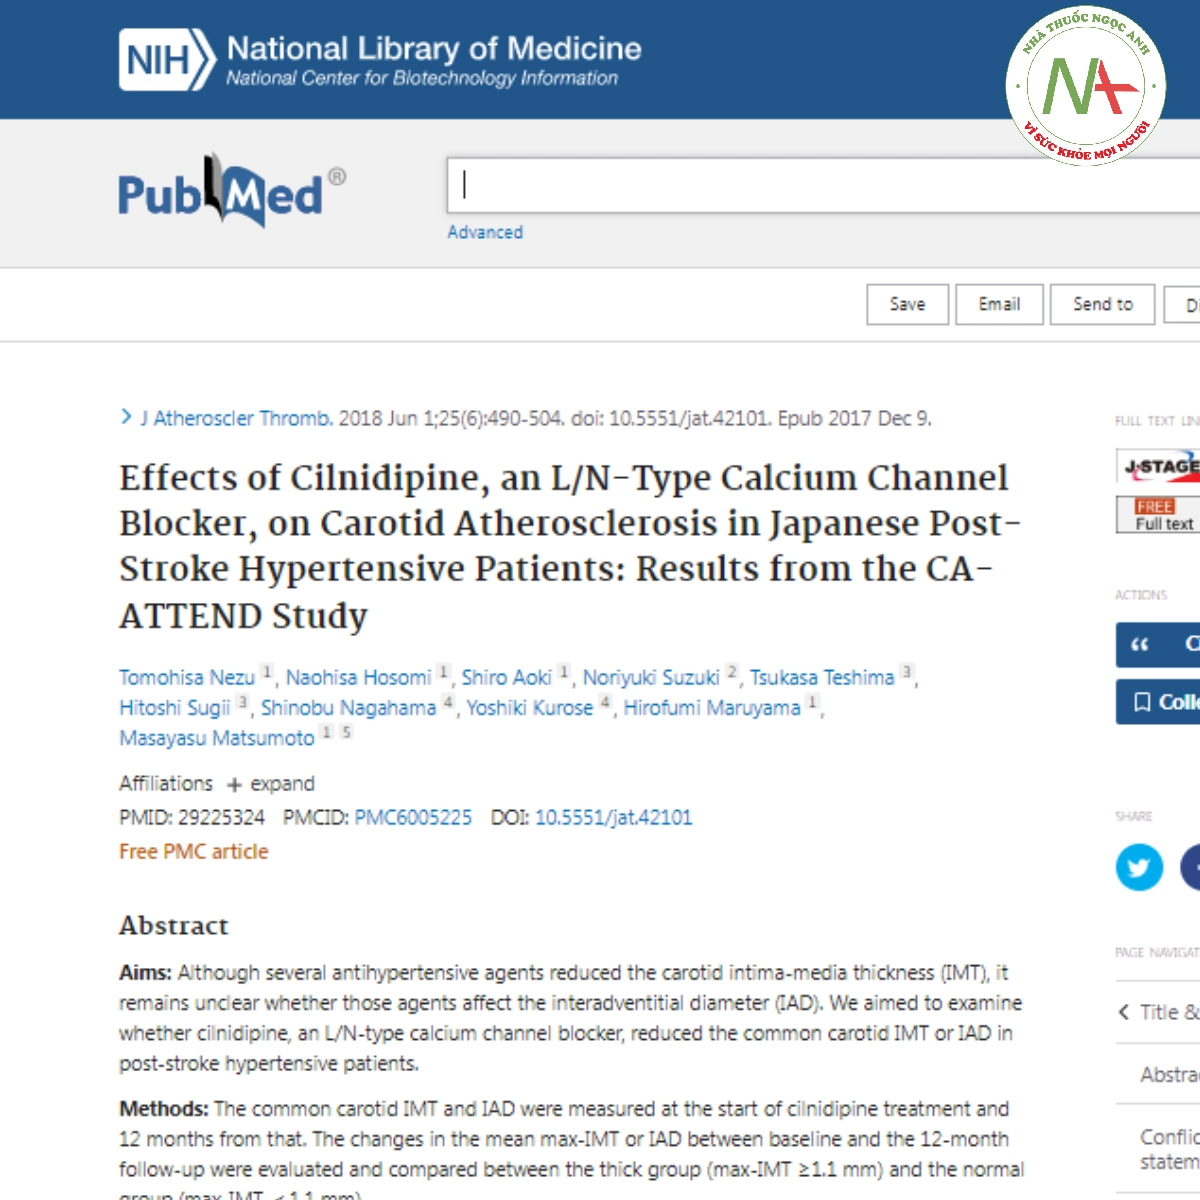 Effects of Cilnidipine, an L/N-Type Calcium Channel Blocker, on Carotid Atherosclerosis in Japanese Post-Stroke Hypertensive Patients: Results from the CA-ATTEND Study